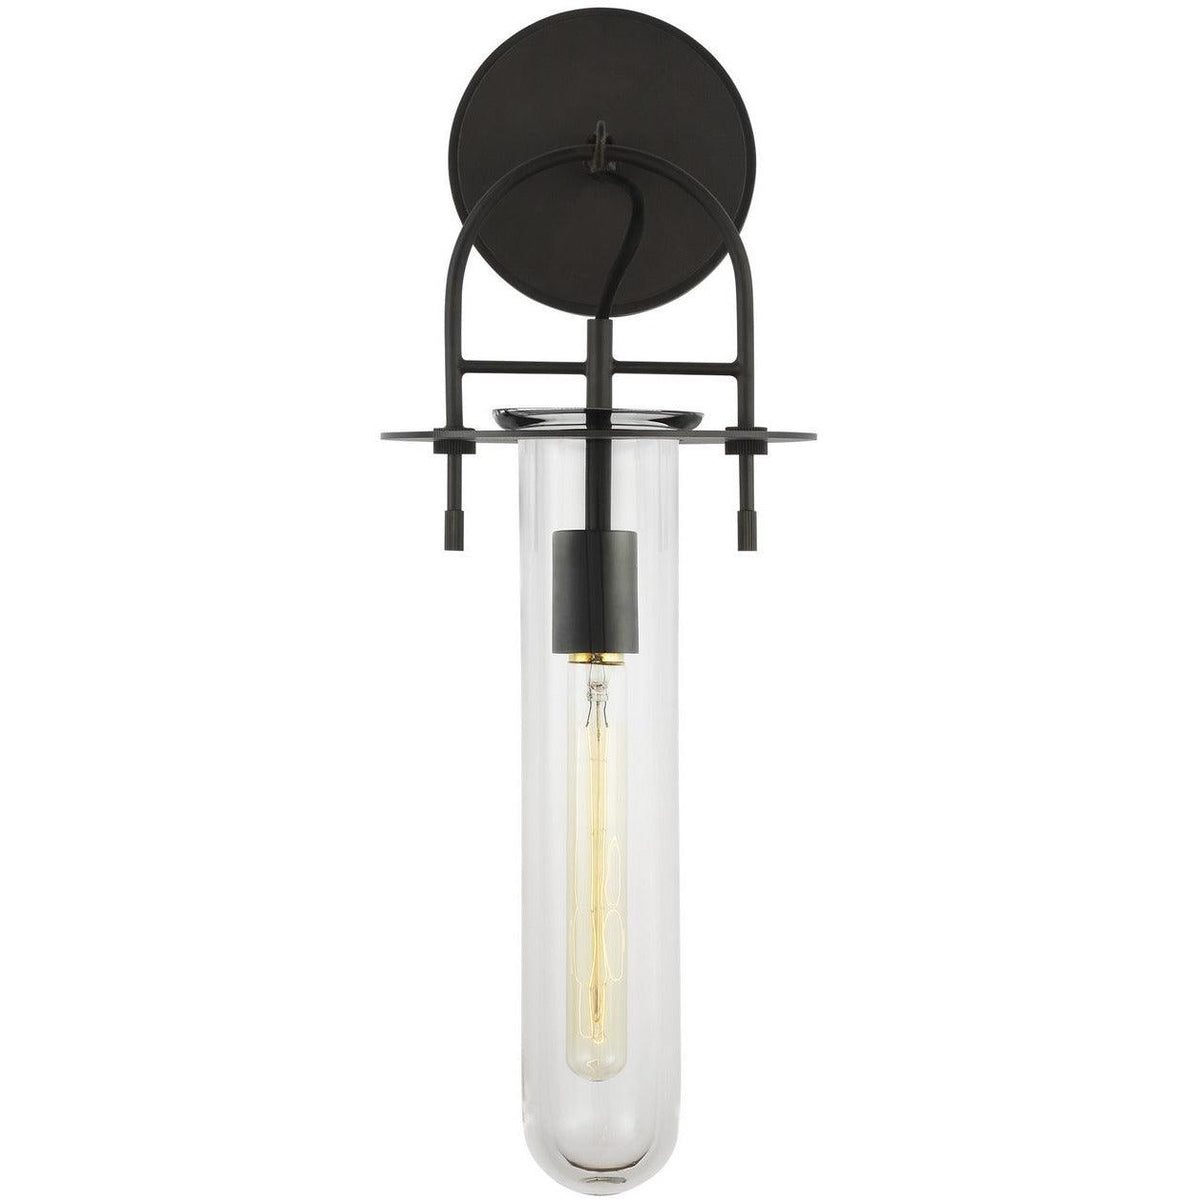 Visual Comfort Studio Collection - Nuance Wall Sconce - KW1061AI | Montreal Lighting & Hardware